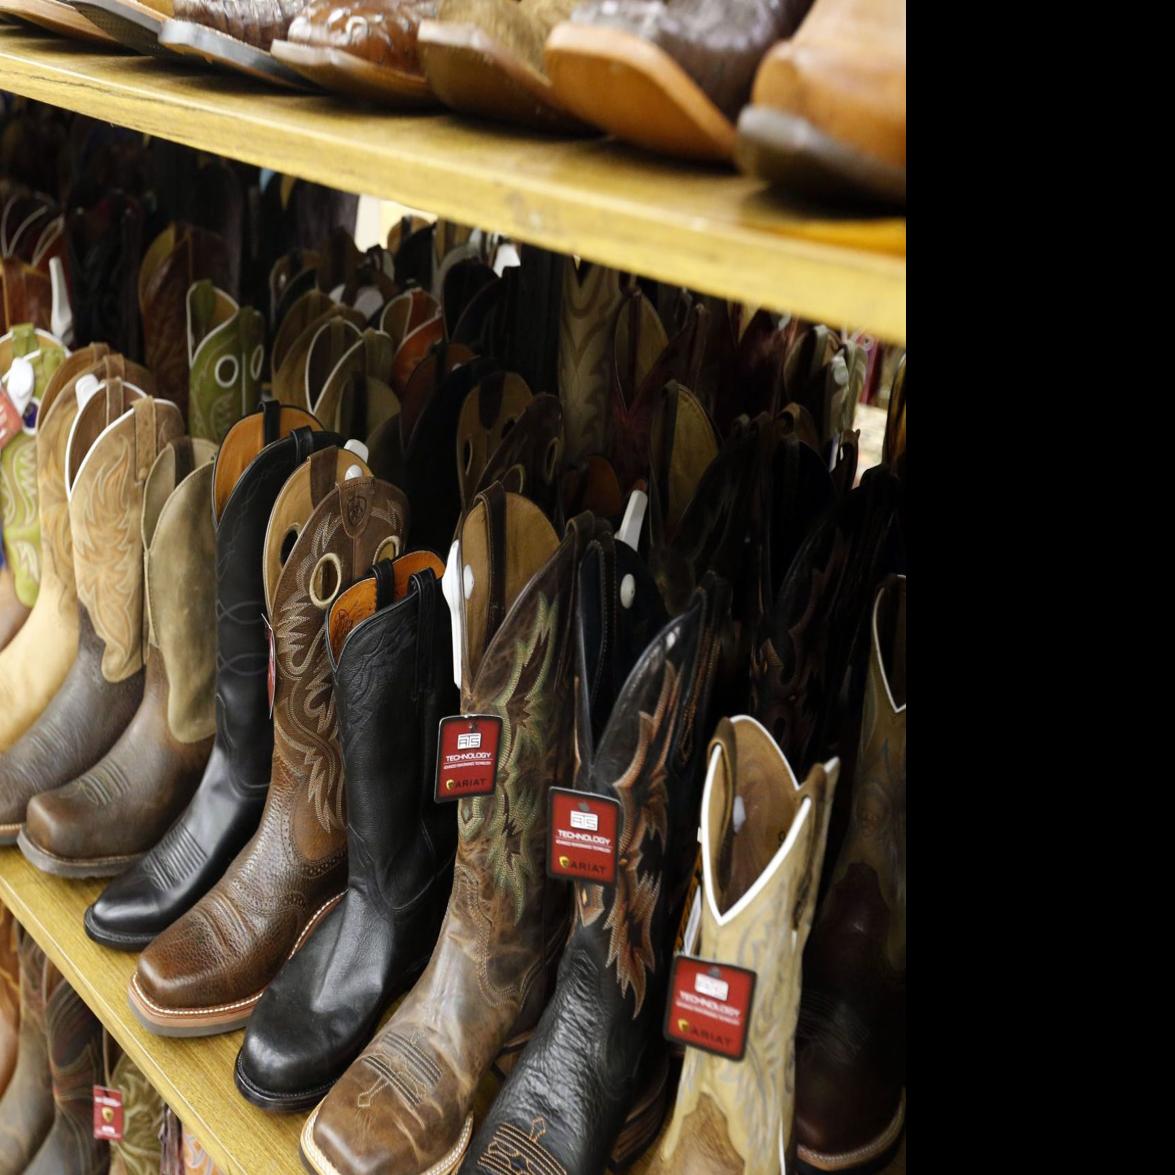 Drysdales Bought By California Chain Boot Barn Local News Tulsaworldcom